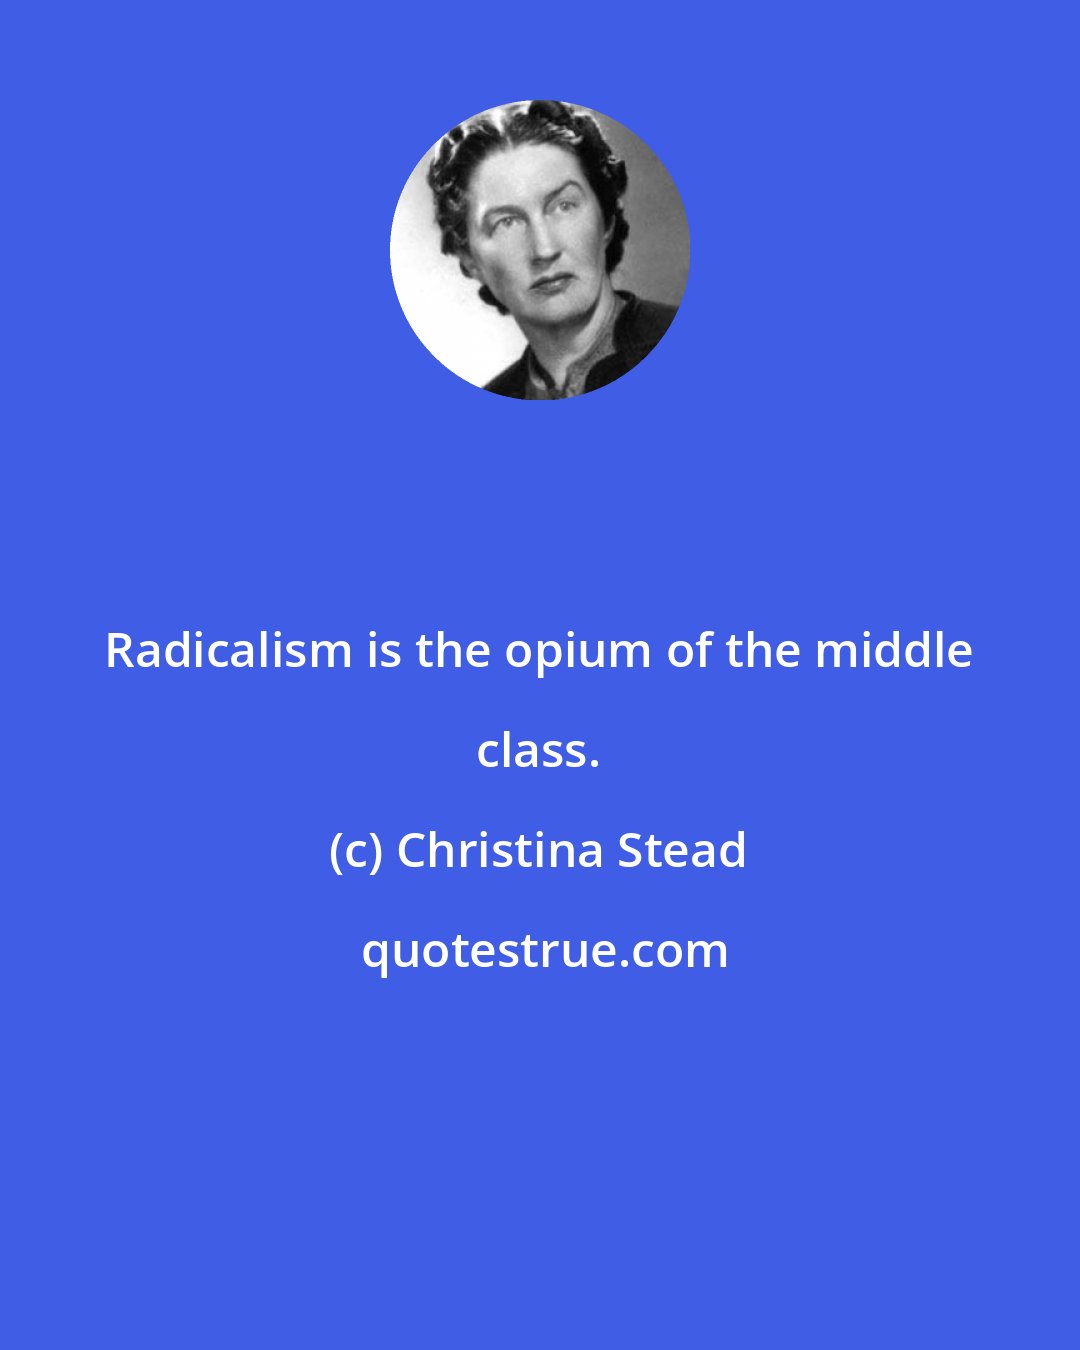 Christina Stead: Radicalism is the opium of the middle class.